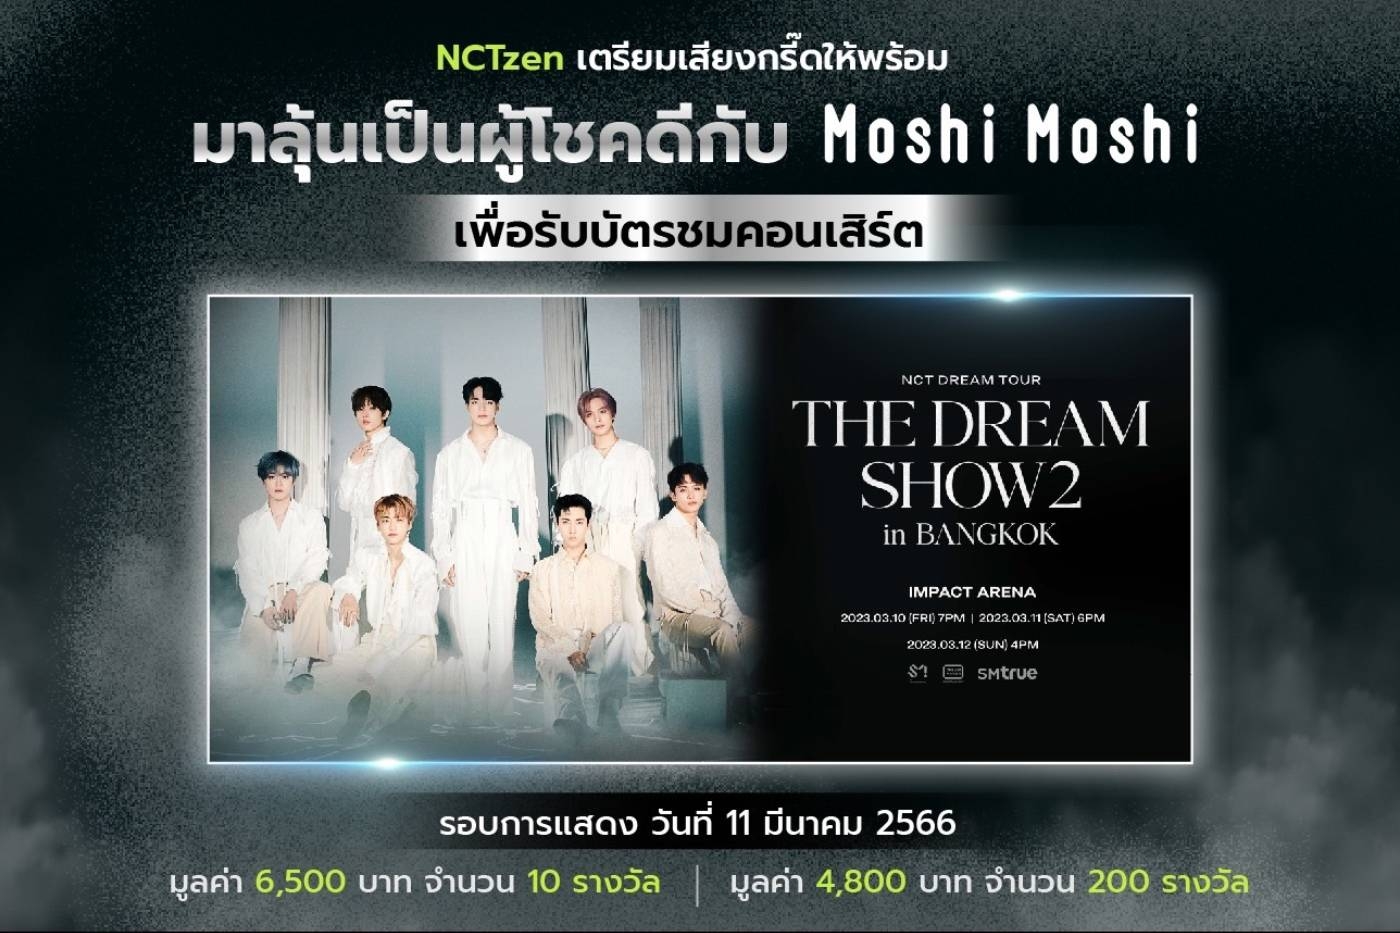 Stand a chance to win the NCT DREAM TOUR 'THE DREAM SHOW2 : In A DREAM' in BANGKOK concert ticket with Moshi Moshi.